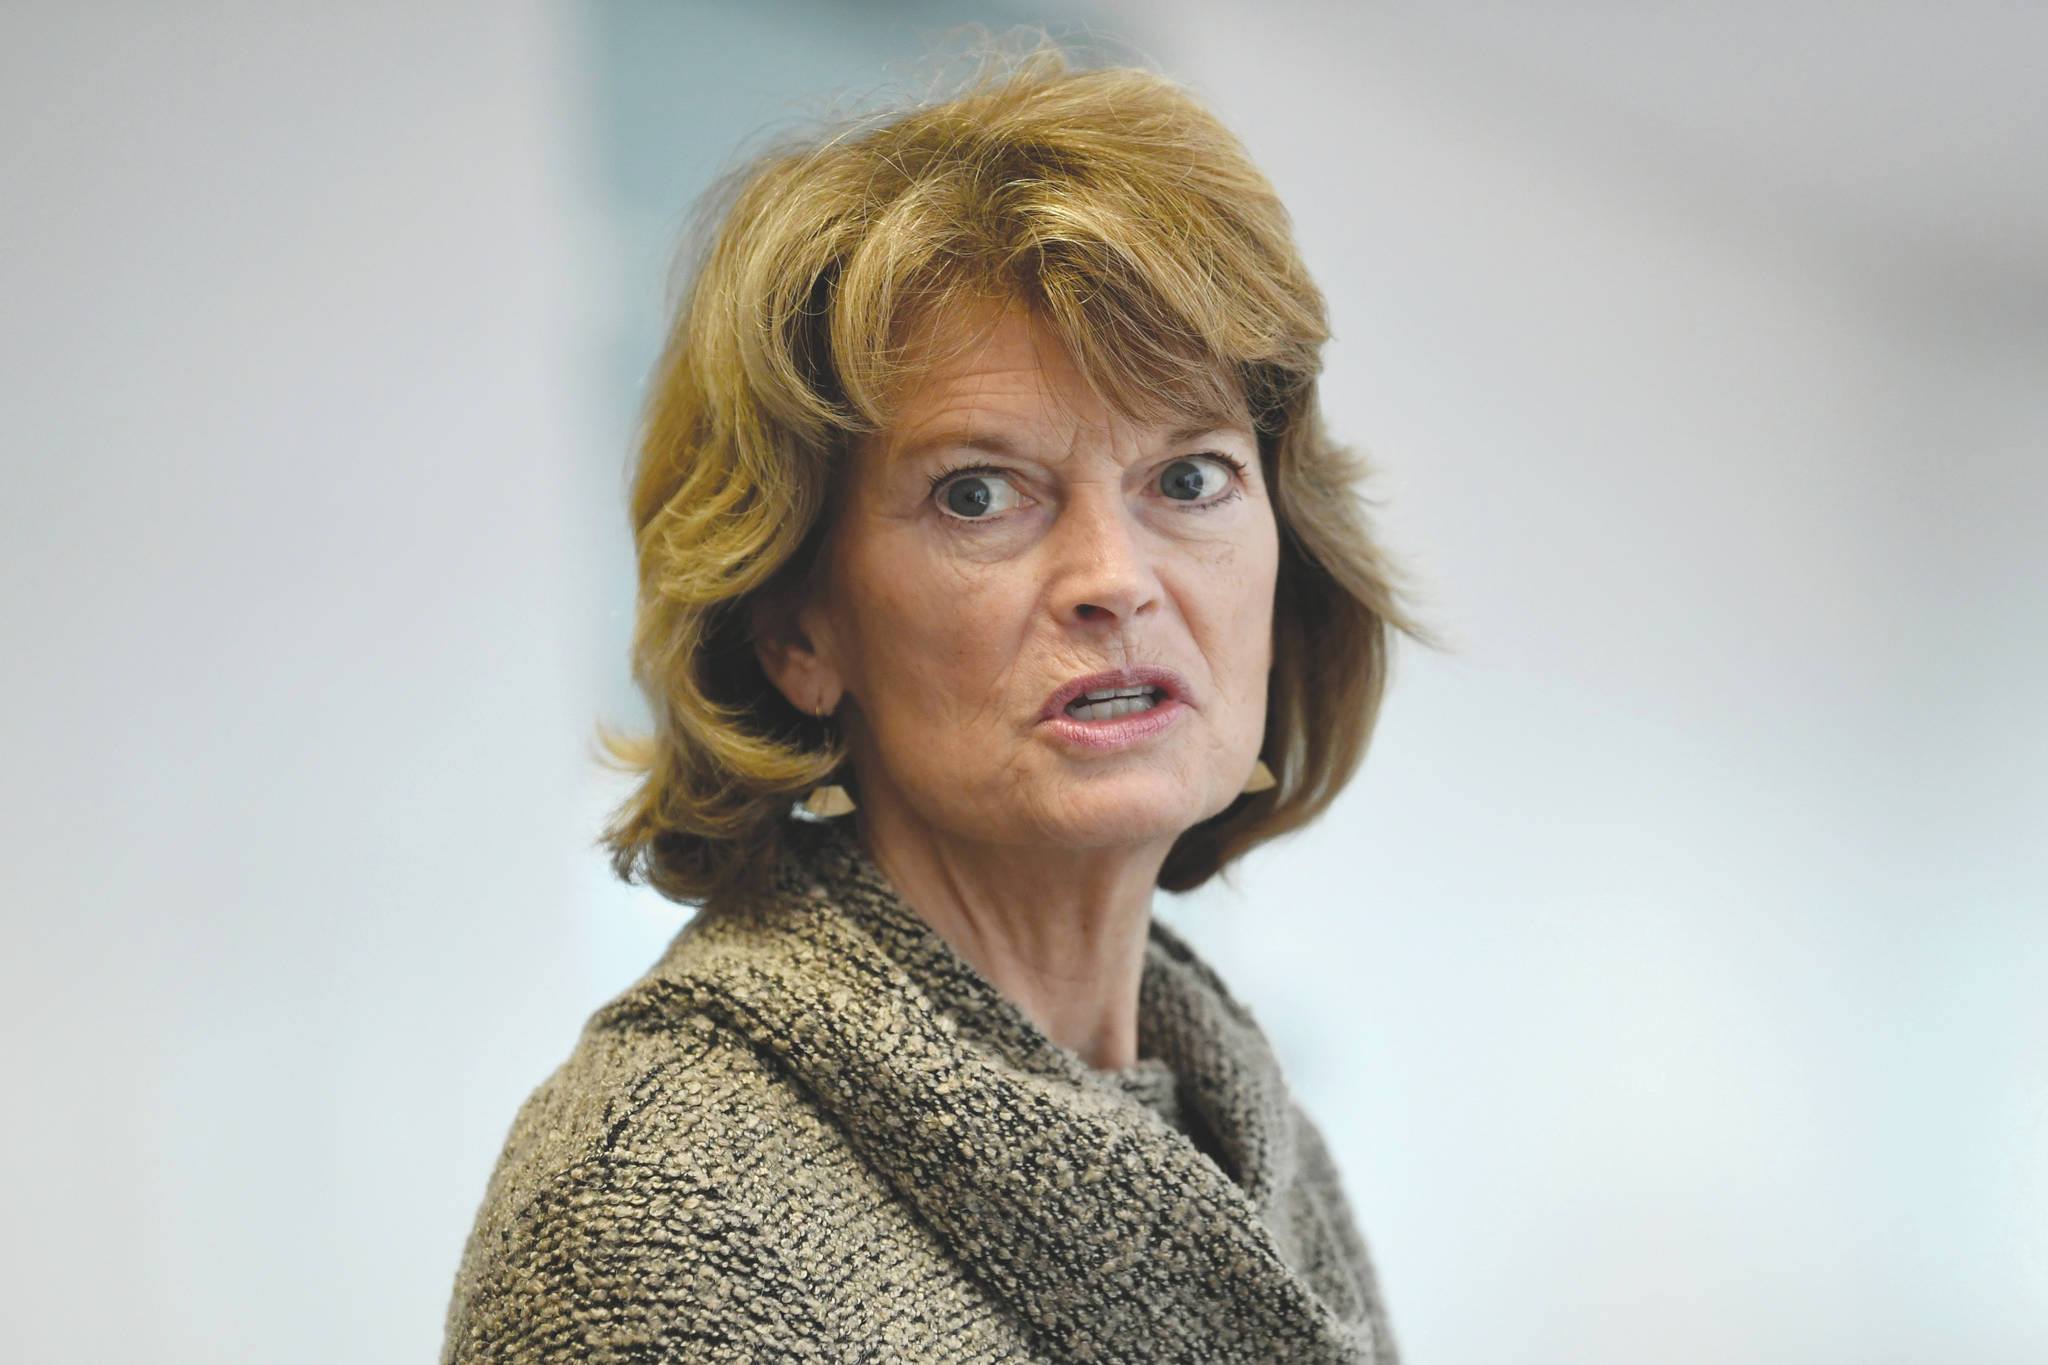 Associated Press                                Sen. Lisa Murkowski, R-Alaska, acknowledged Thursday that she’s “struggling” over whether she can support President Donald Trump given his handling of the virus and race crises shaking the United States.